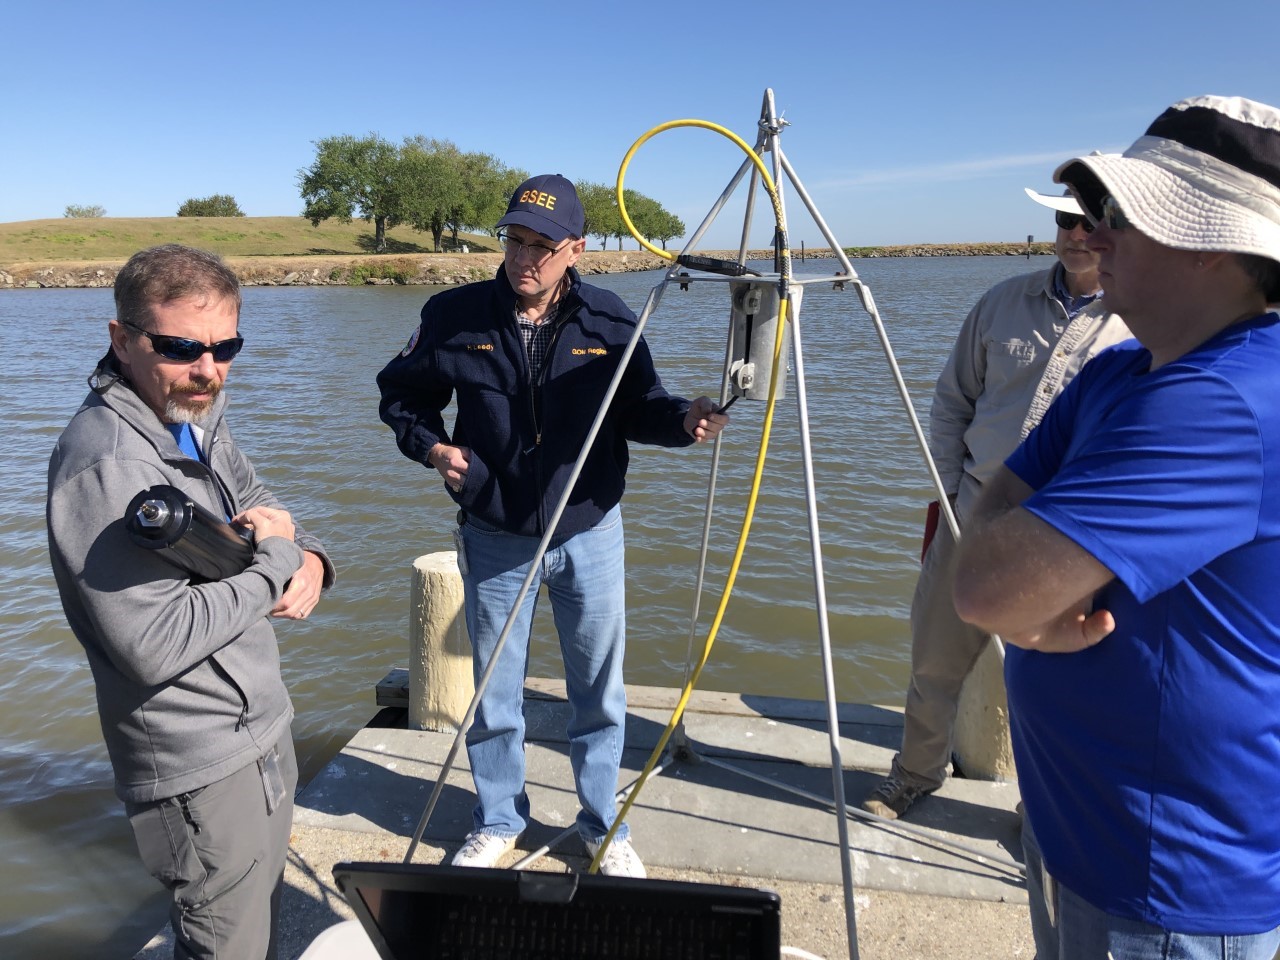 BSEE SCAMP members completing a training evolution with the BSEE Sector Scanning Sonar